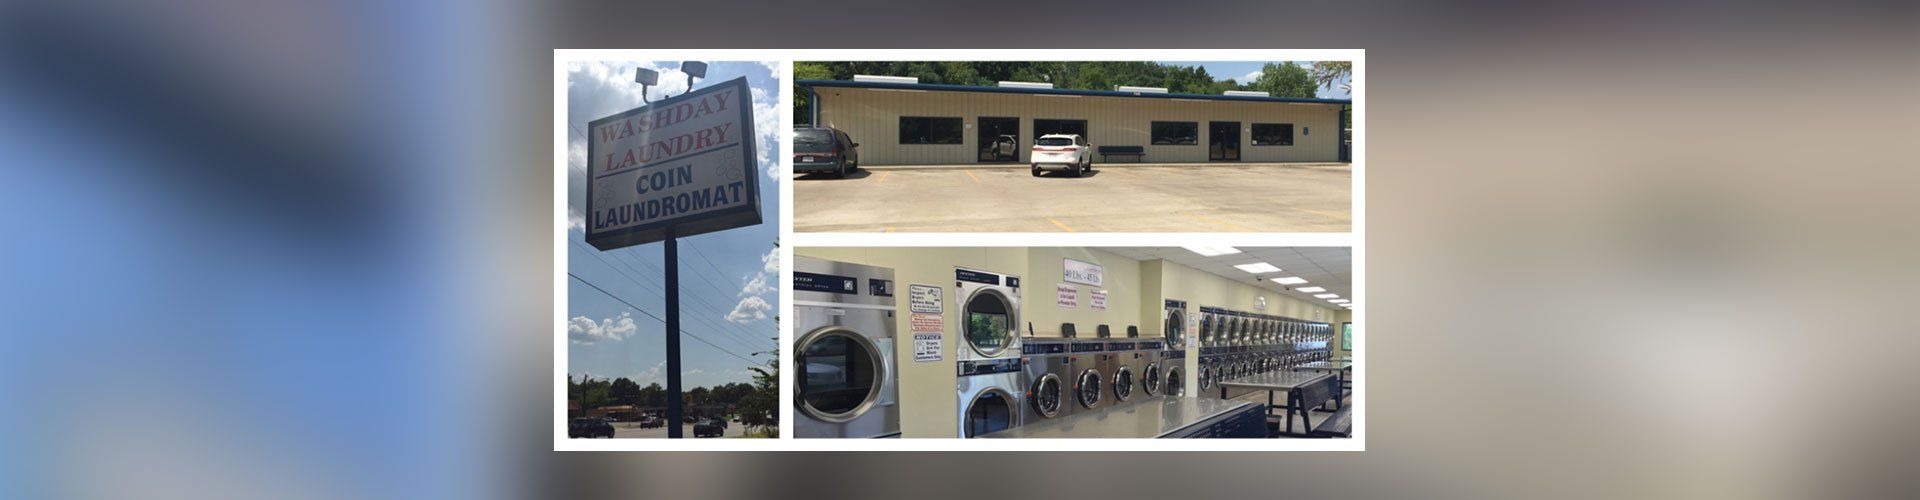 24 hour laundry fort worth texas